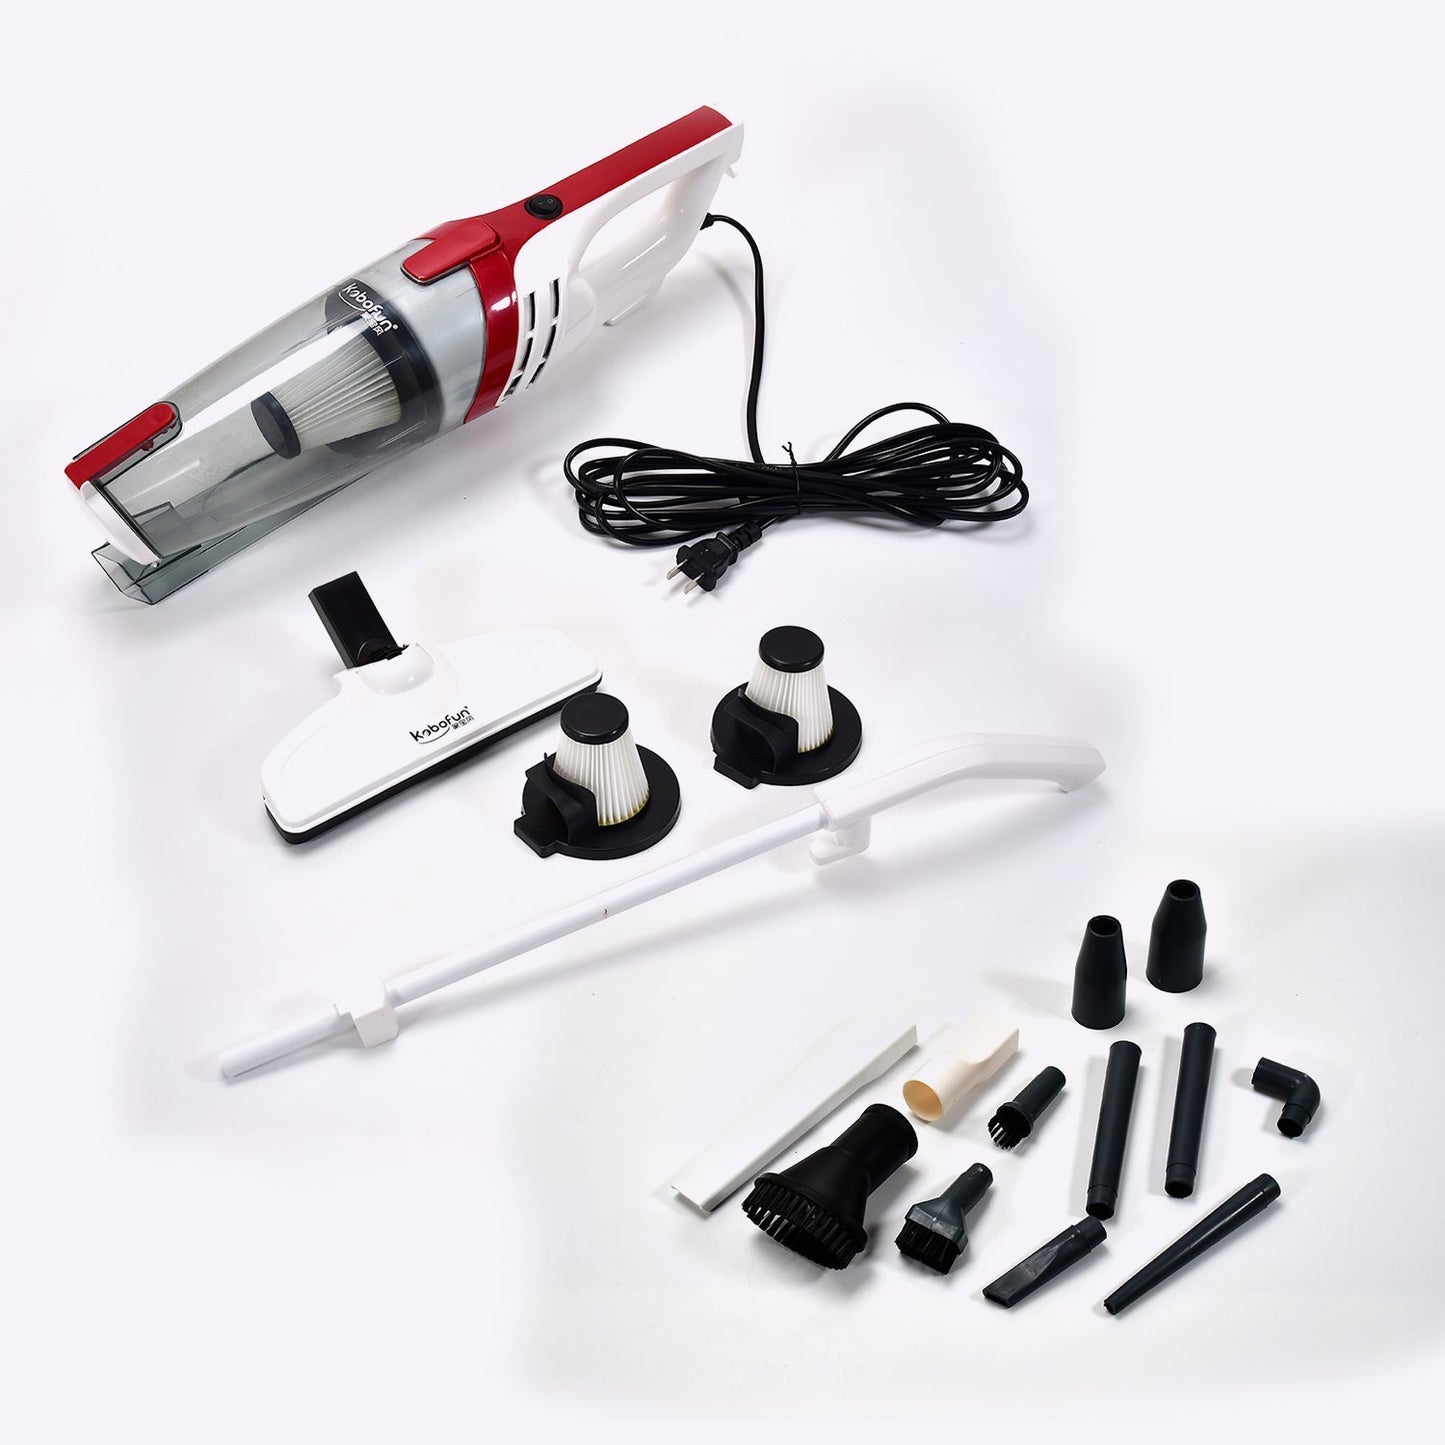 4046 Vacuum Cleaner Handheld & Stick for Home and Office Use DeoDap